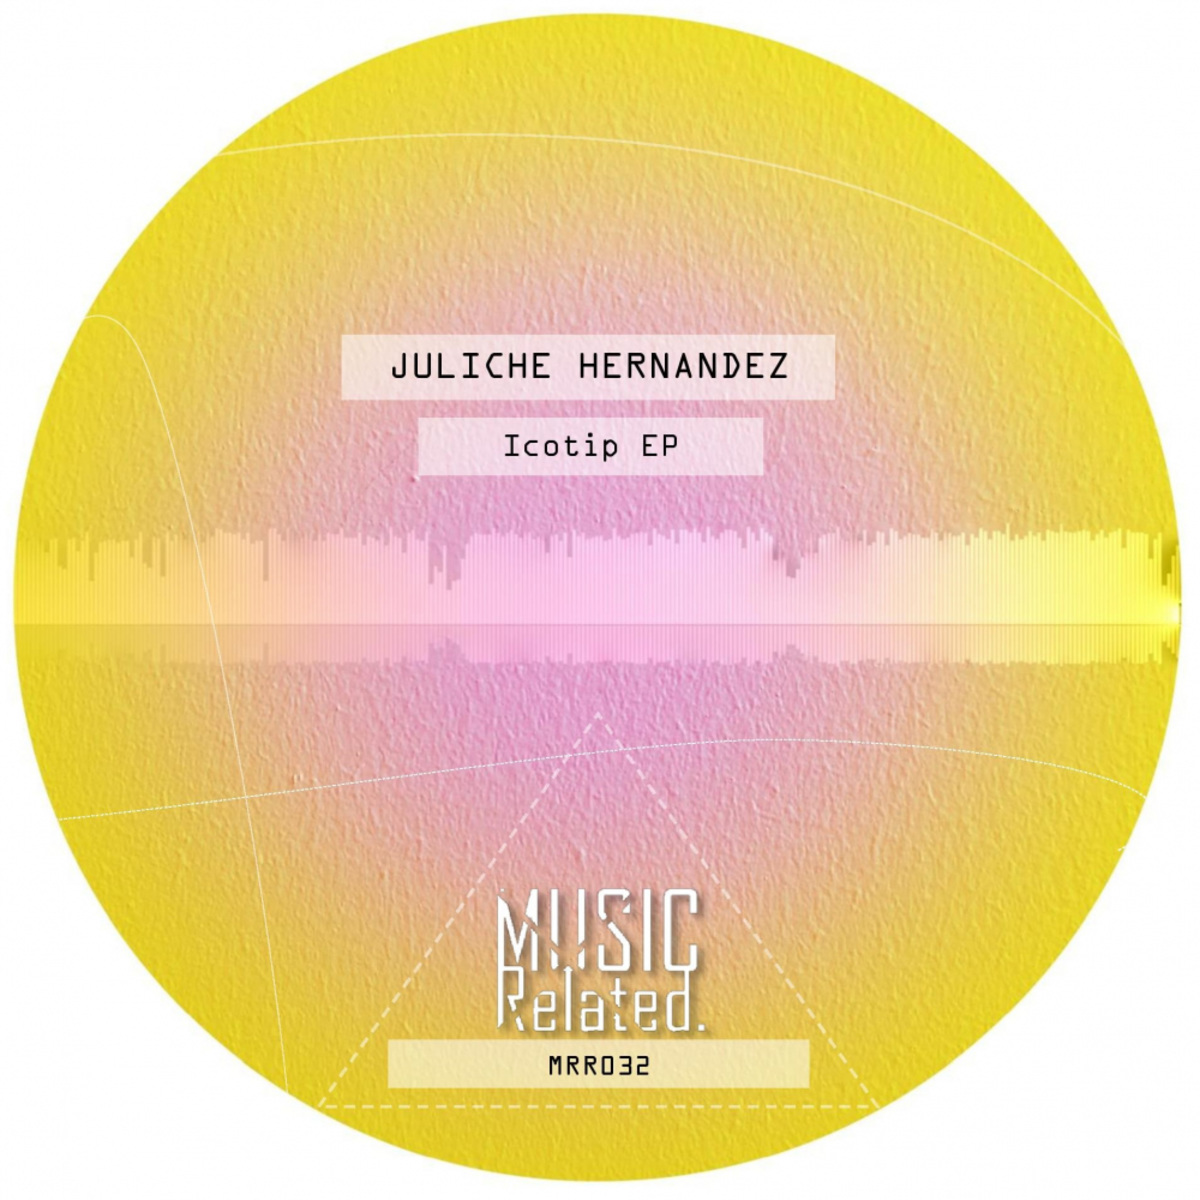 image cover: Juliche Hernandez - Icotip / Music Related Records